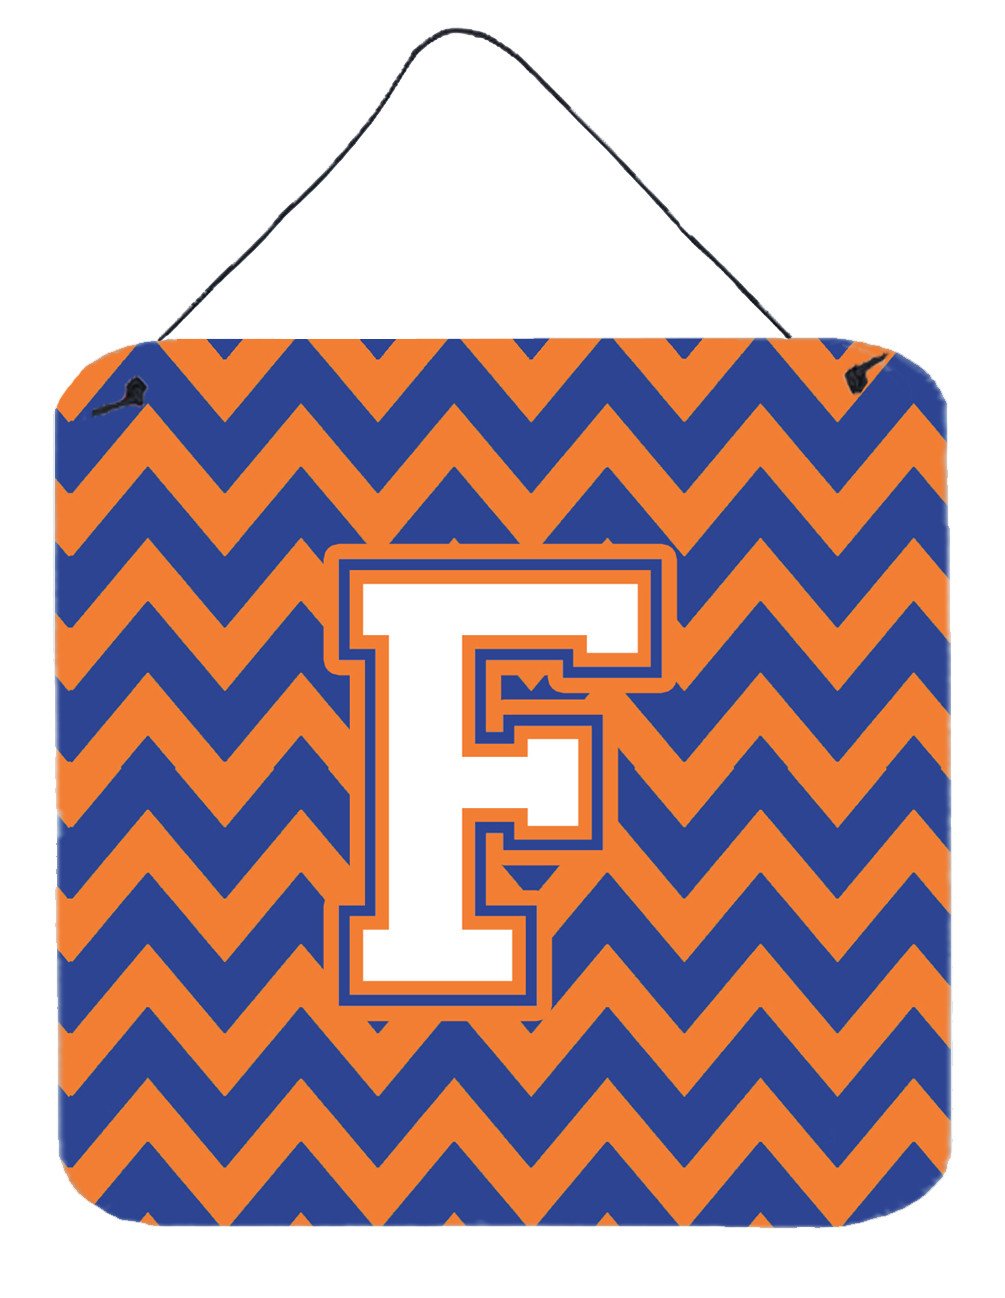 Letter F Chevron Blue and Orange #3 Wall or Door Hanging Prints CJ1060-FDS66 by Caroline's Treasures